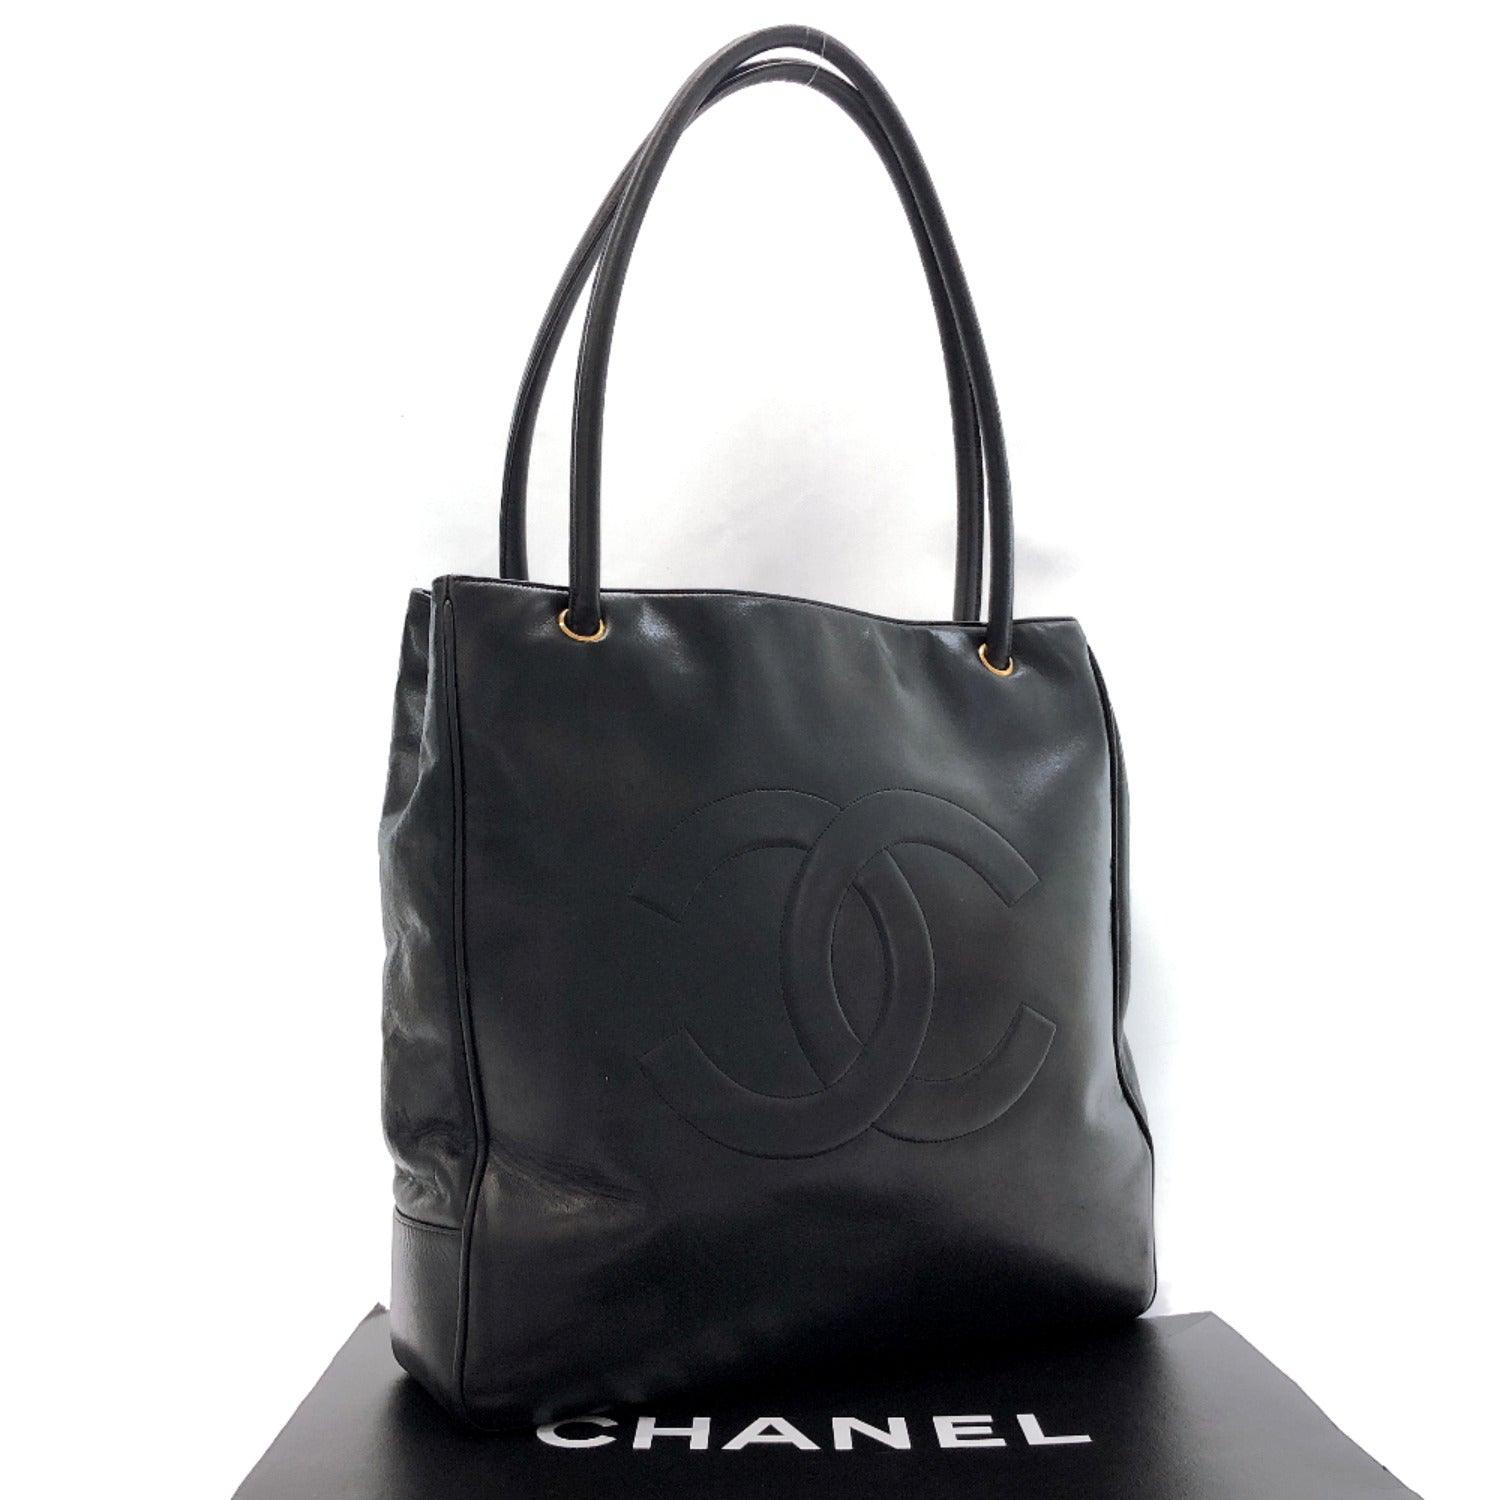 CHANEL Tote Bag COCO Mark leather black Women Used